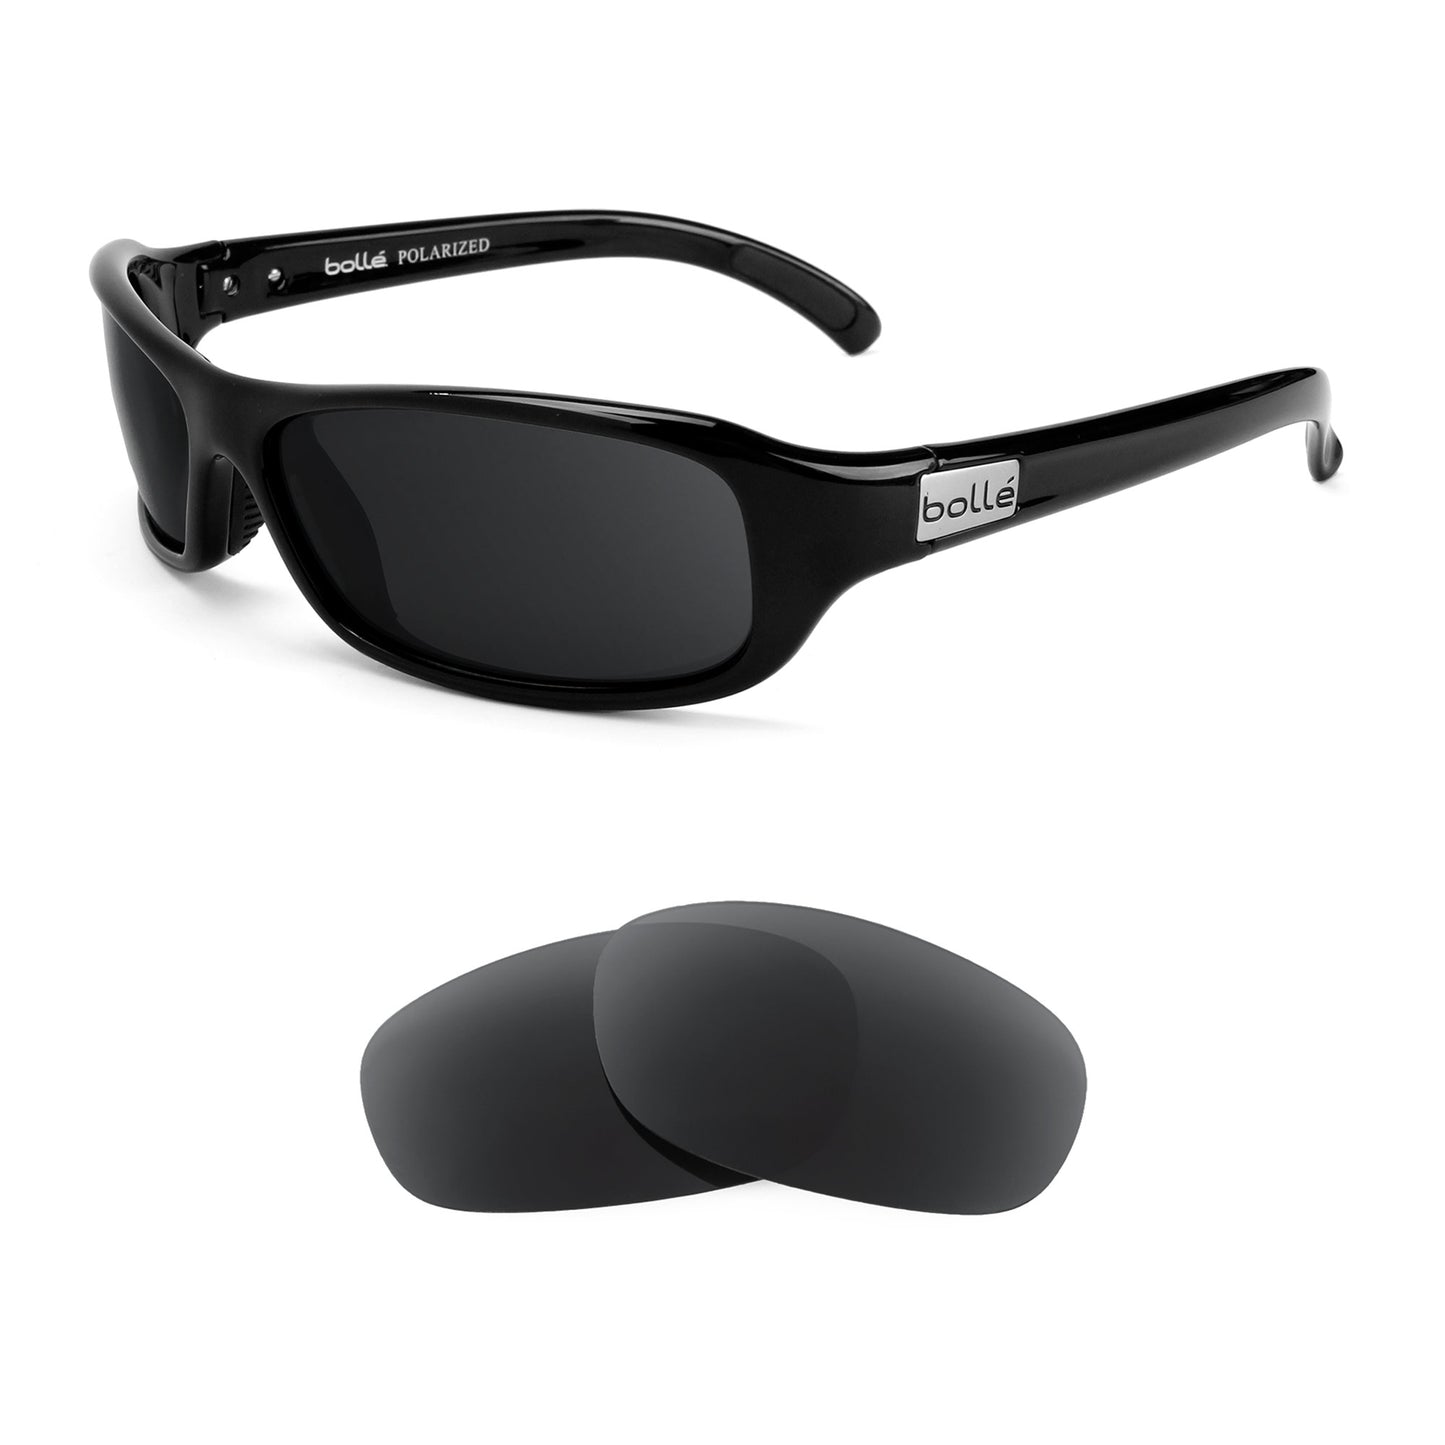 Bolle Fang sunglasses with replacement lenses